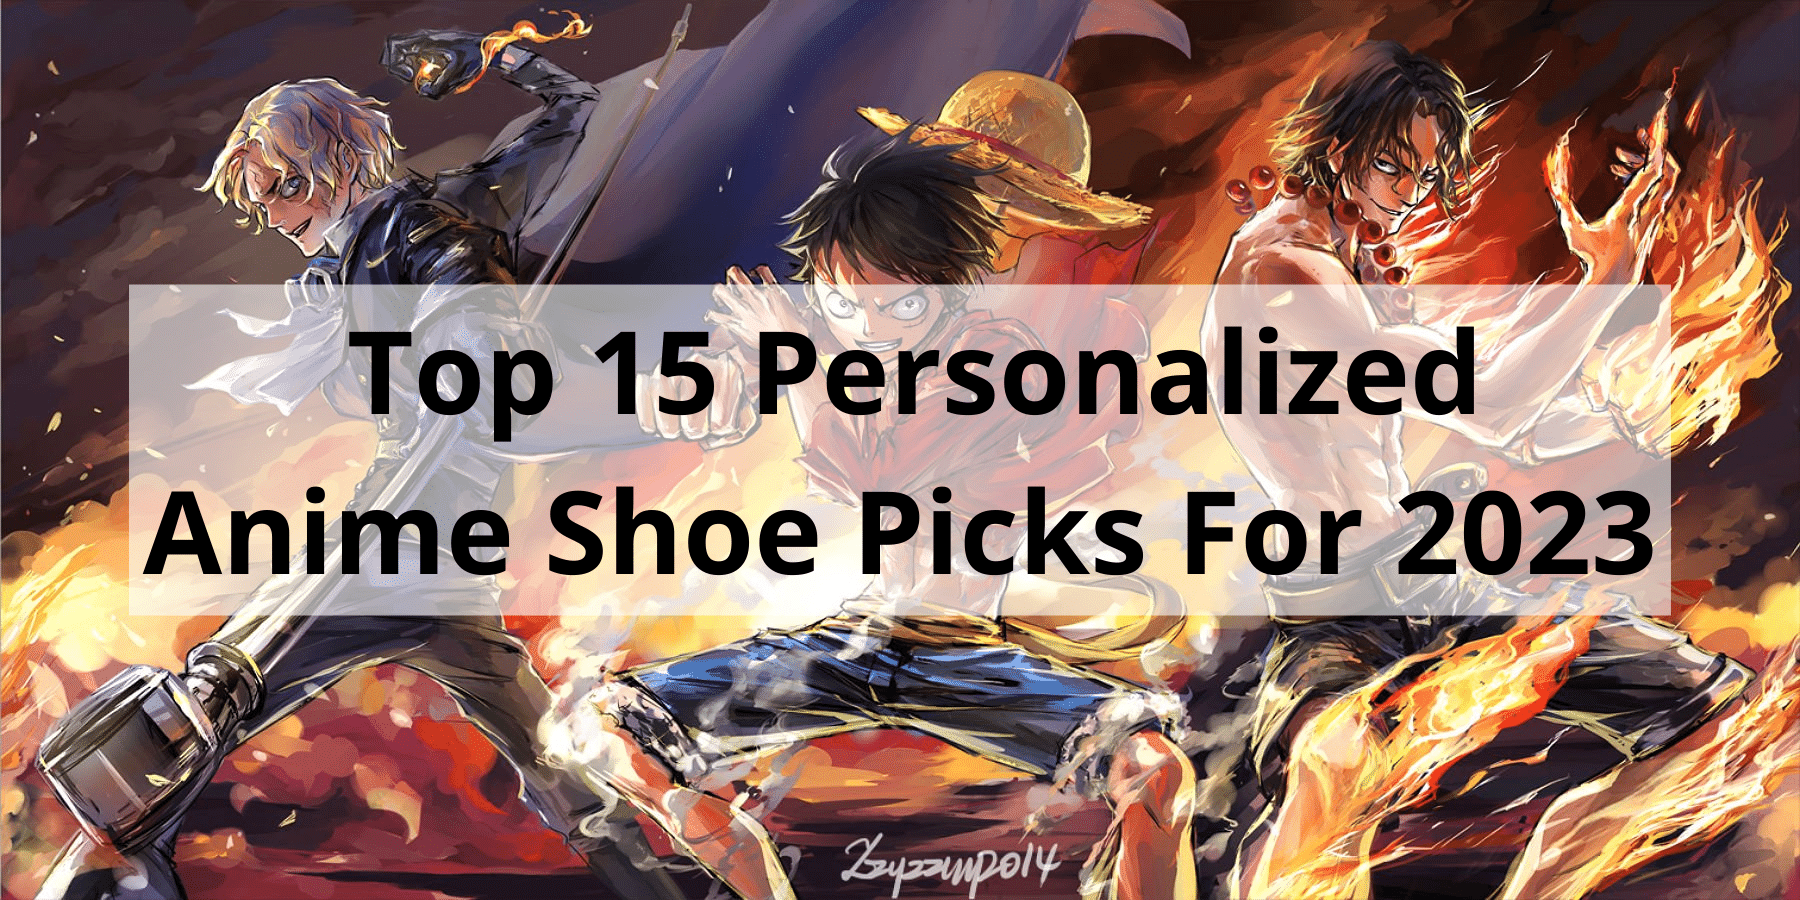 Top 15 Personalized Anime Shoe Picks For 2023